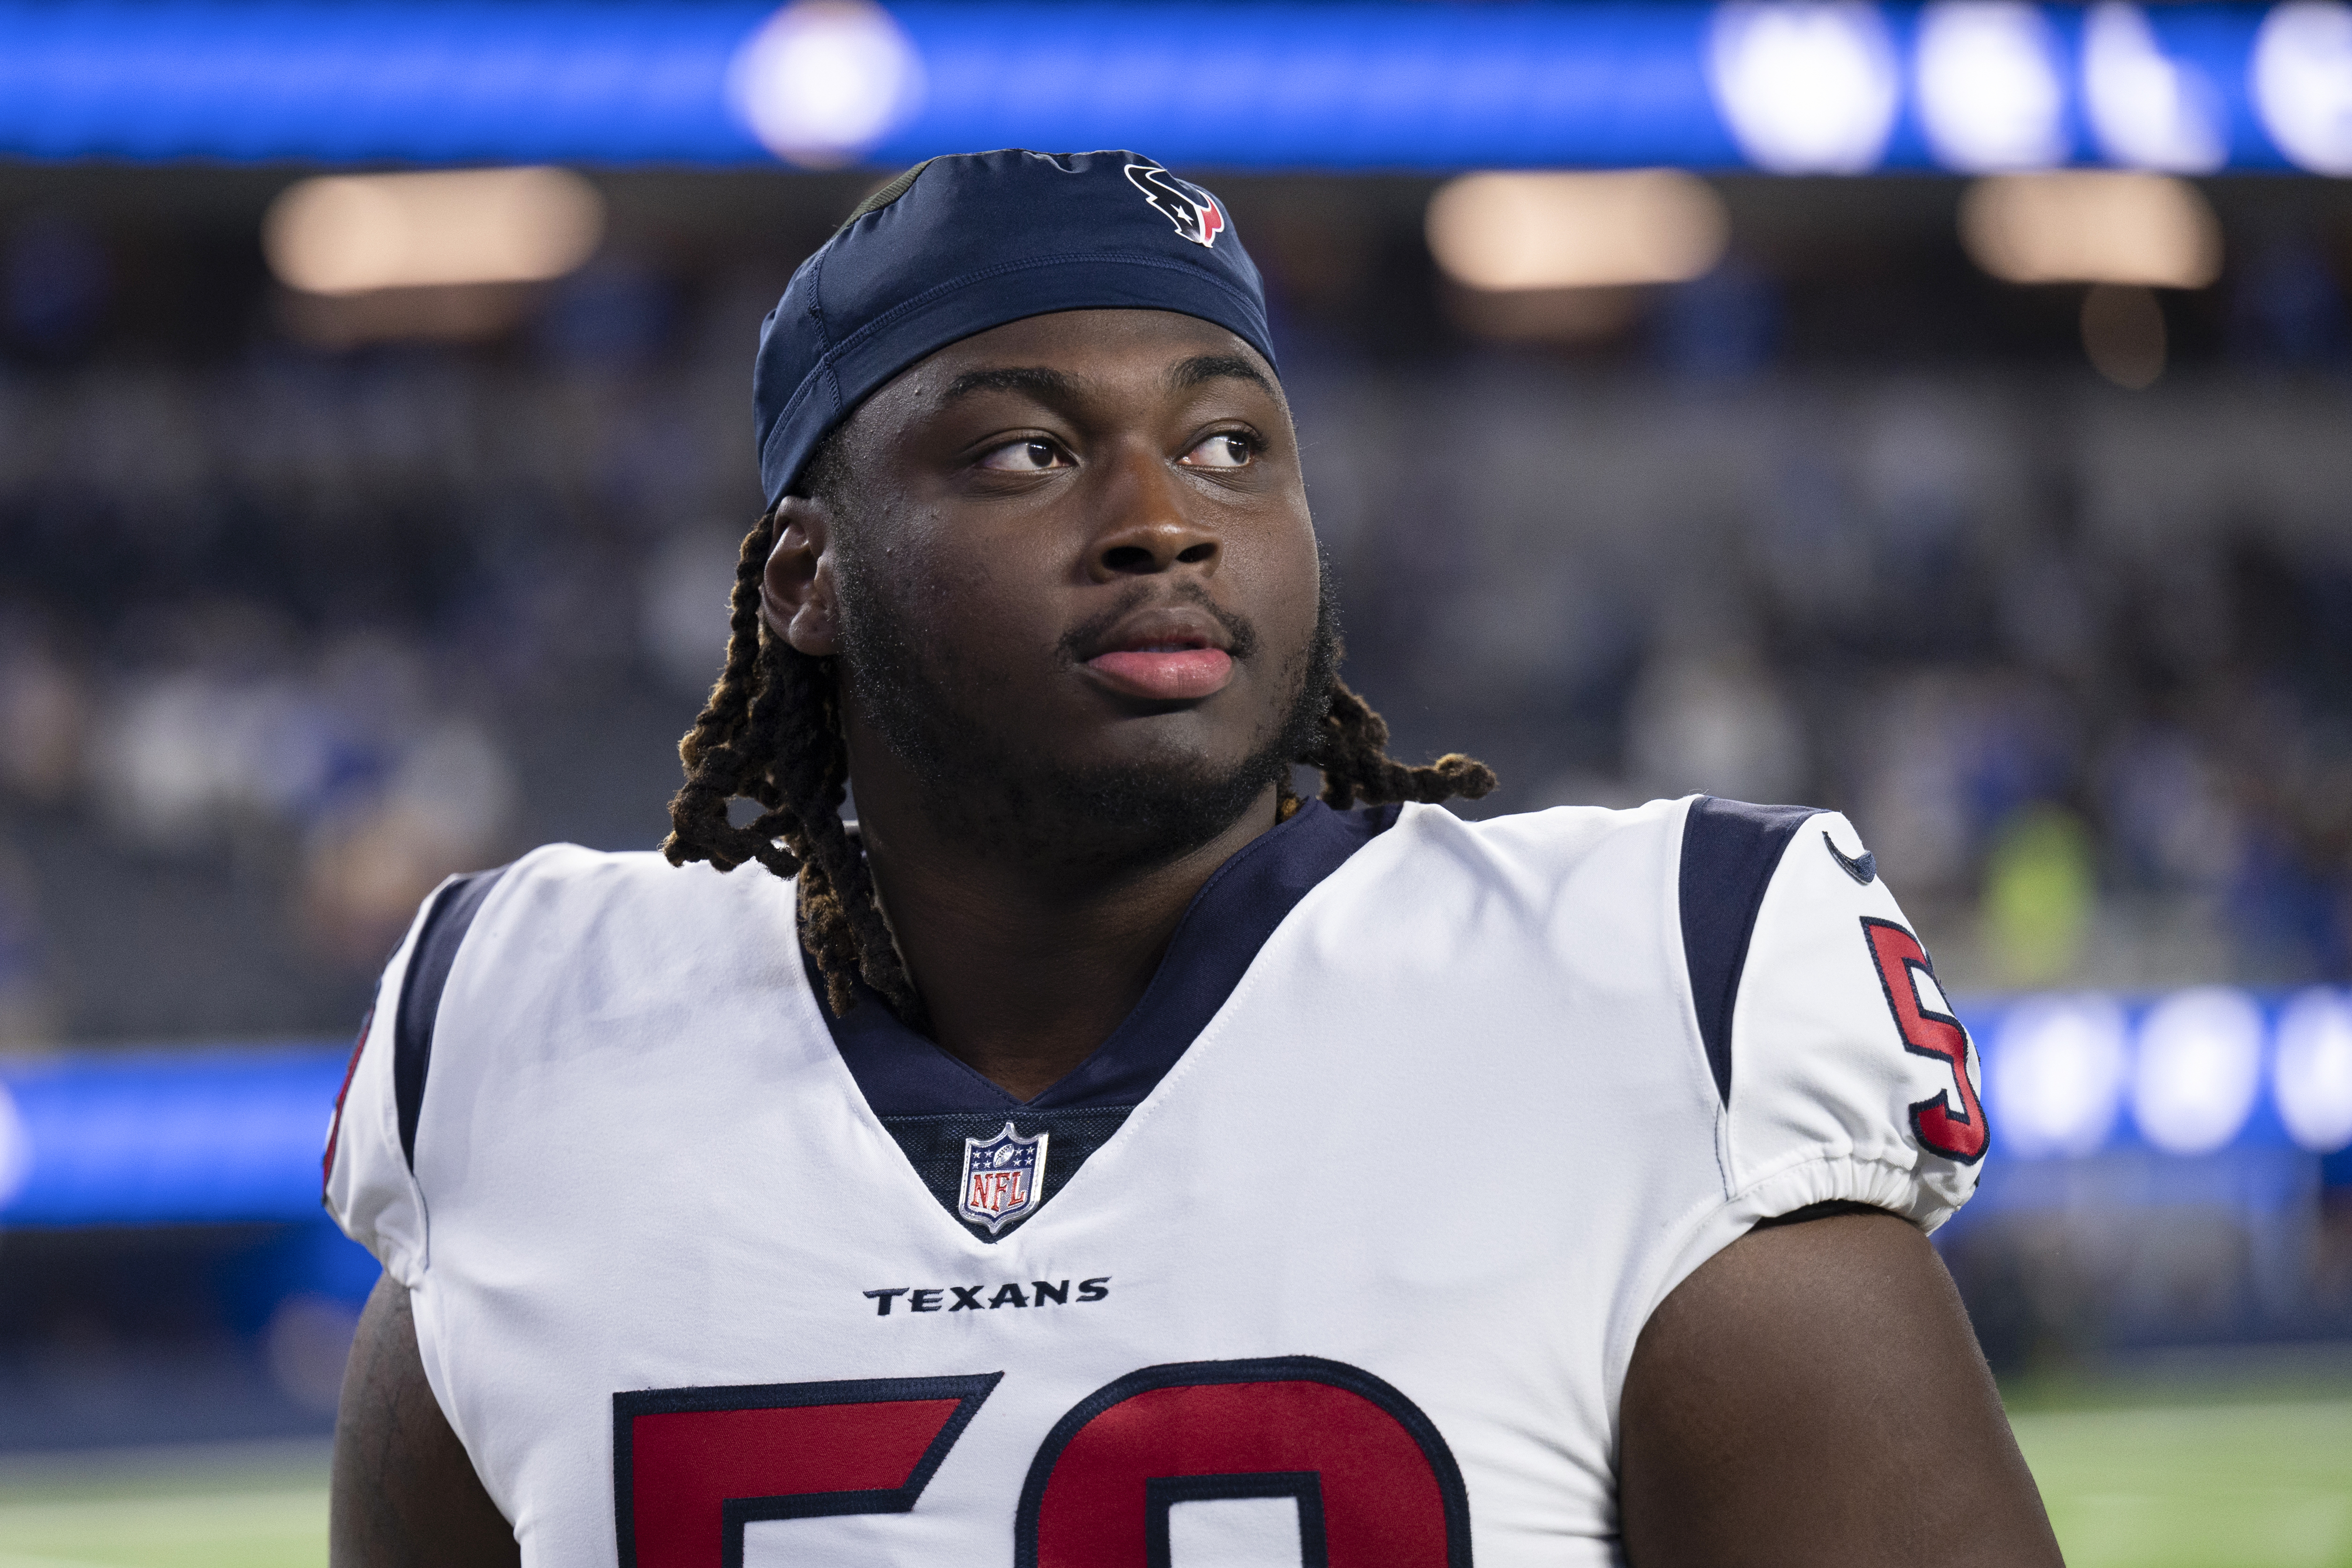 Sources: Texans rookie Kenyon Green to start first NFL game against Broncos